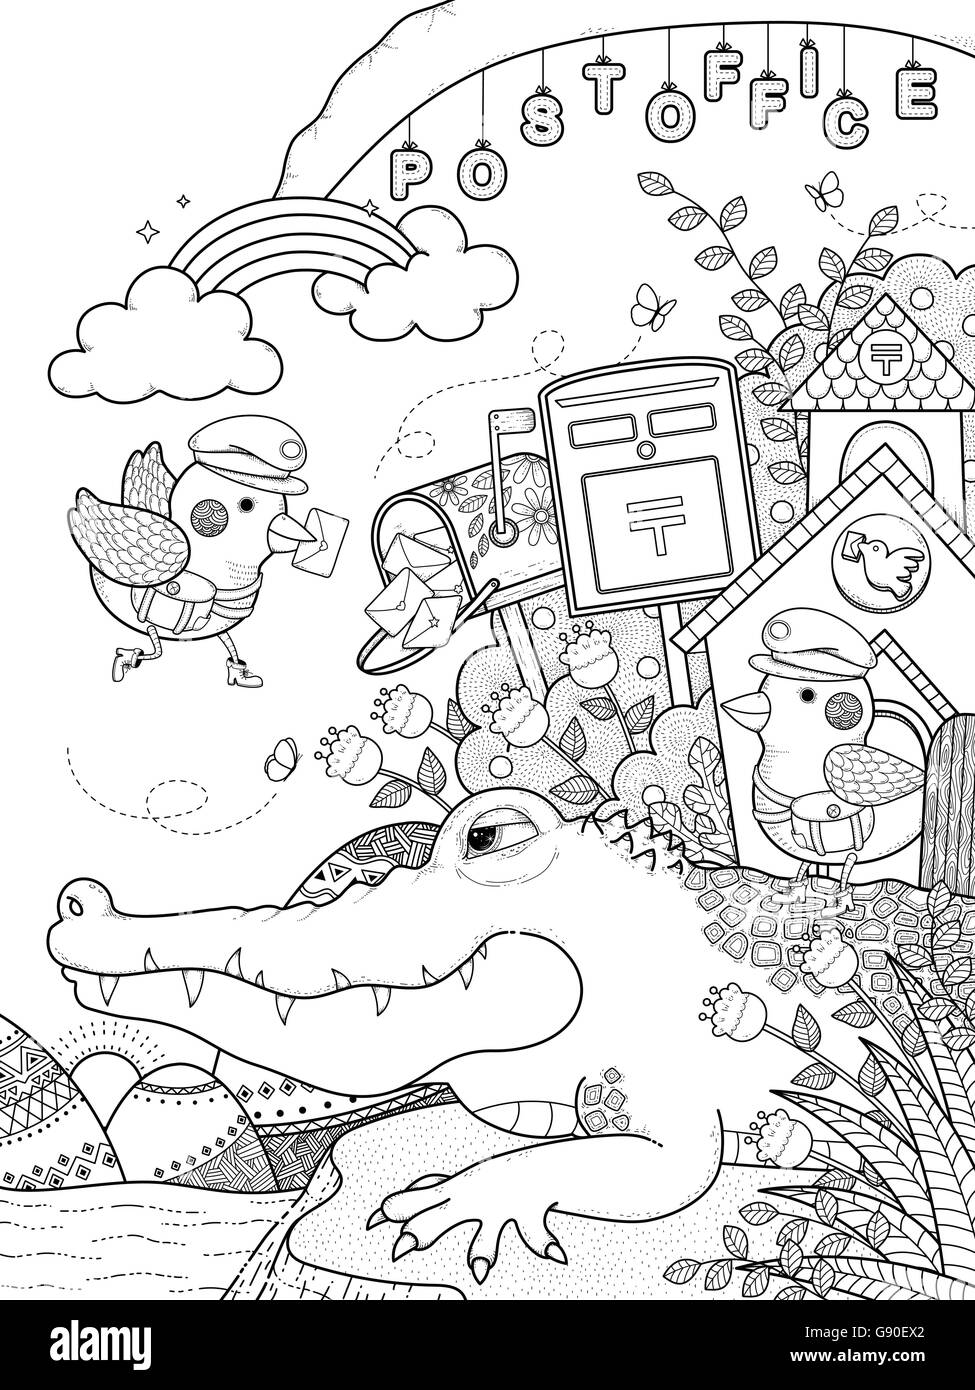 adult coloring page - cute alligator with birds mailman Stock Vector